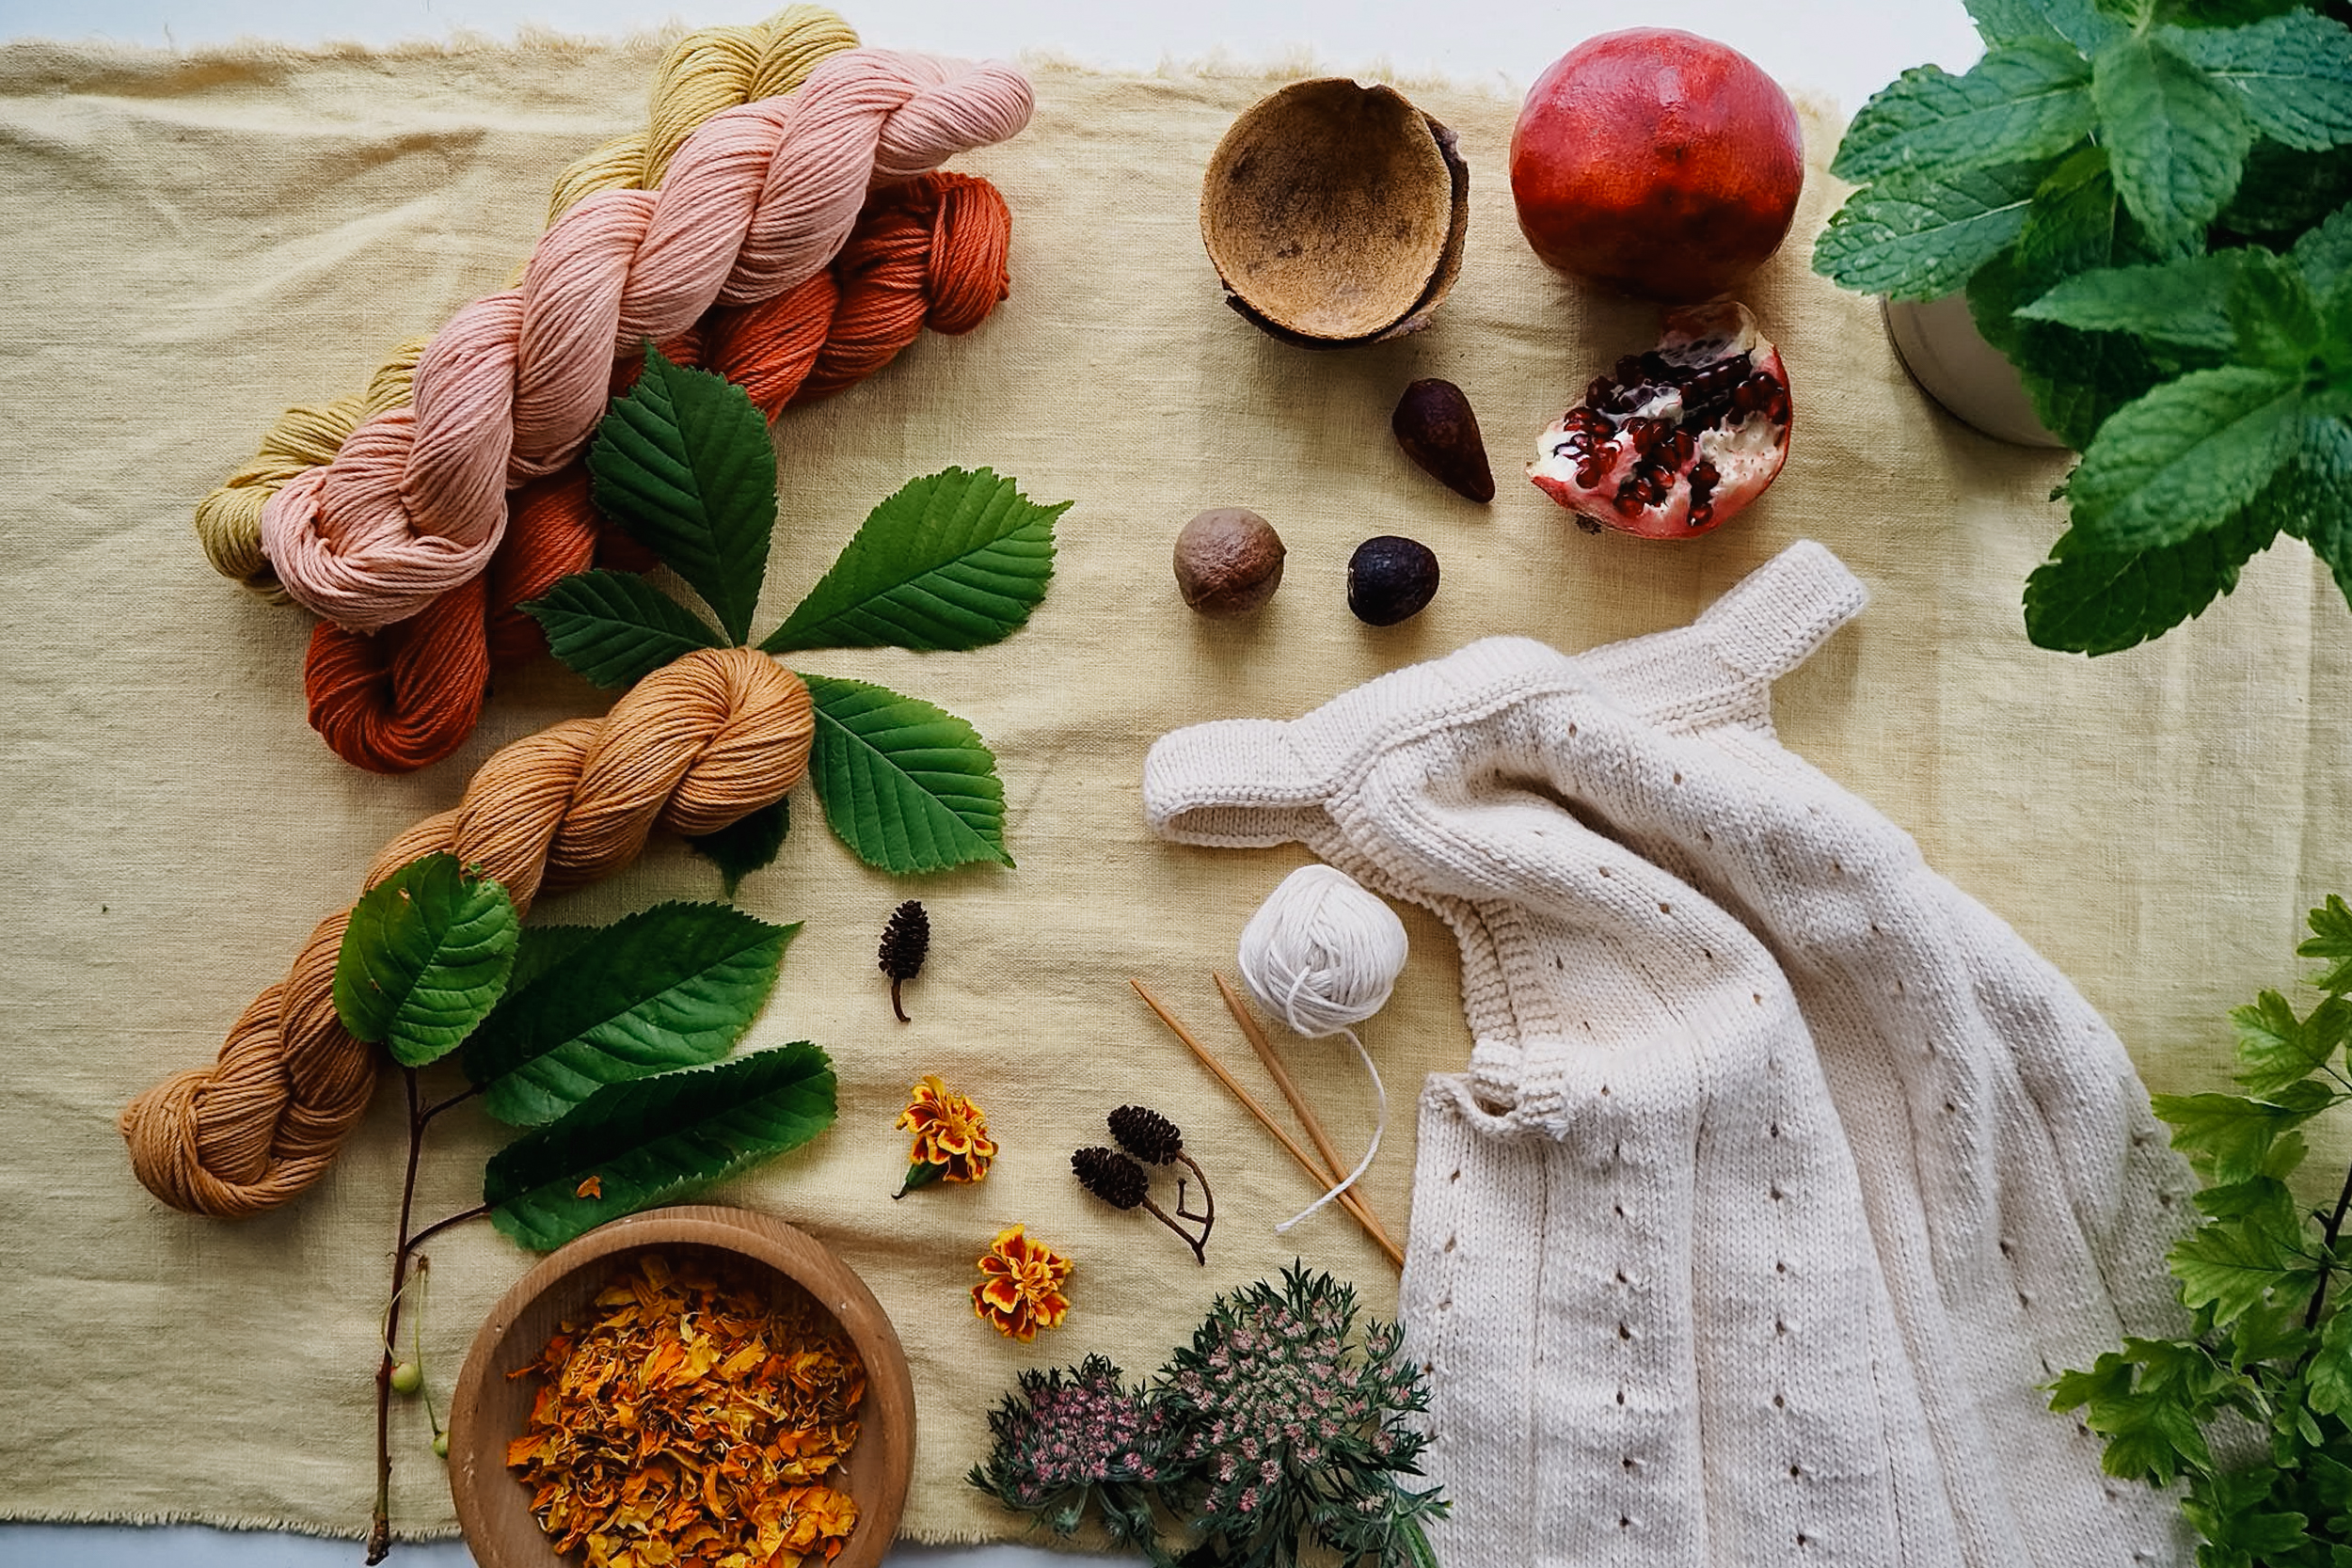 Naturally Dyed fabrics - Natural Dye Workshop by Herbal Academy